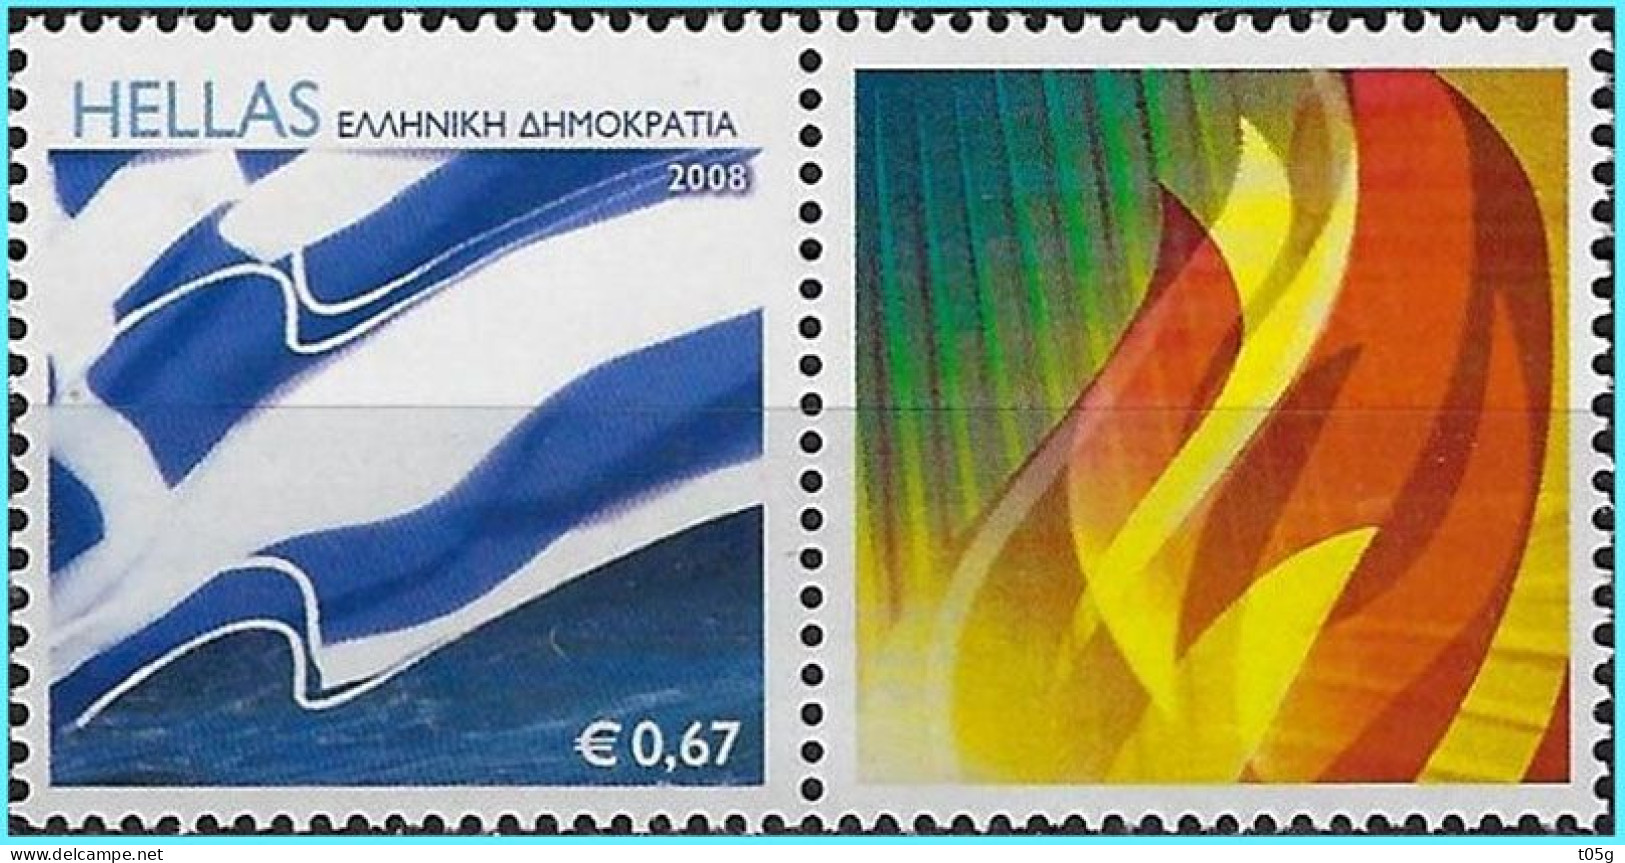 GREECE- GRECE - PERSONAL STAMP 2022: BEIJING WINTER 2022 "OLYMPIC" GAMES Flame   MNH* - Neufs